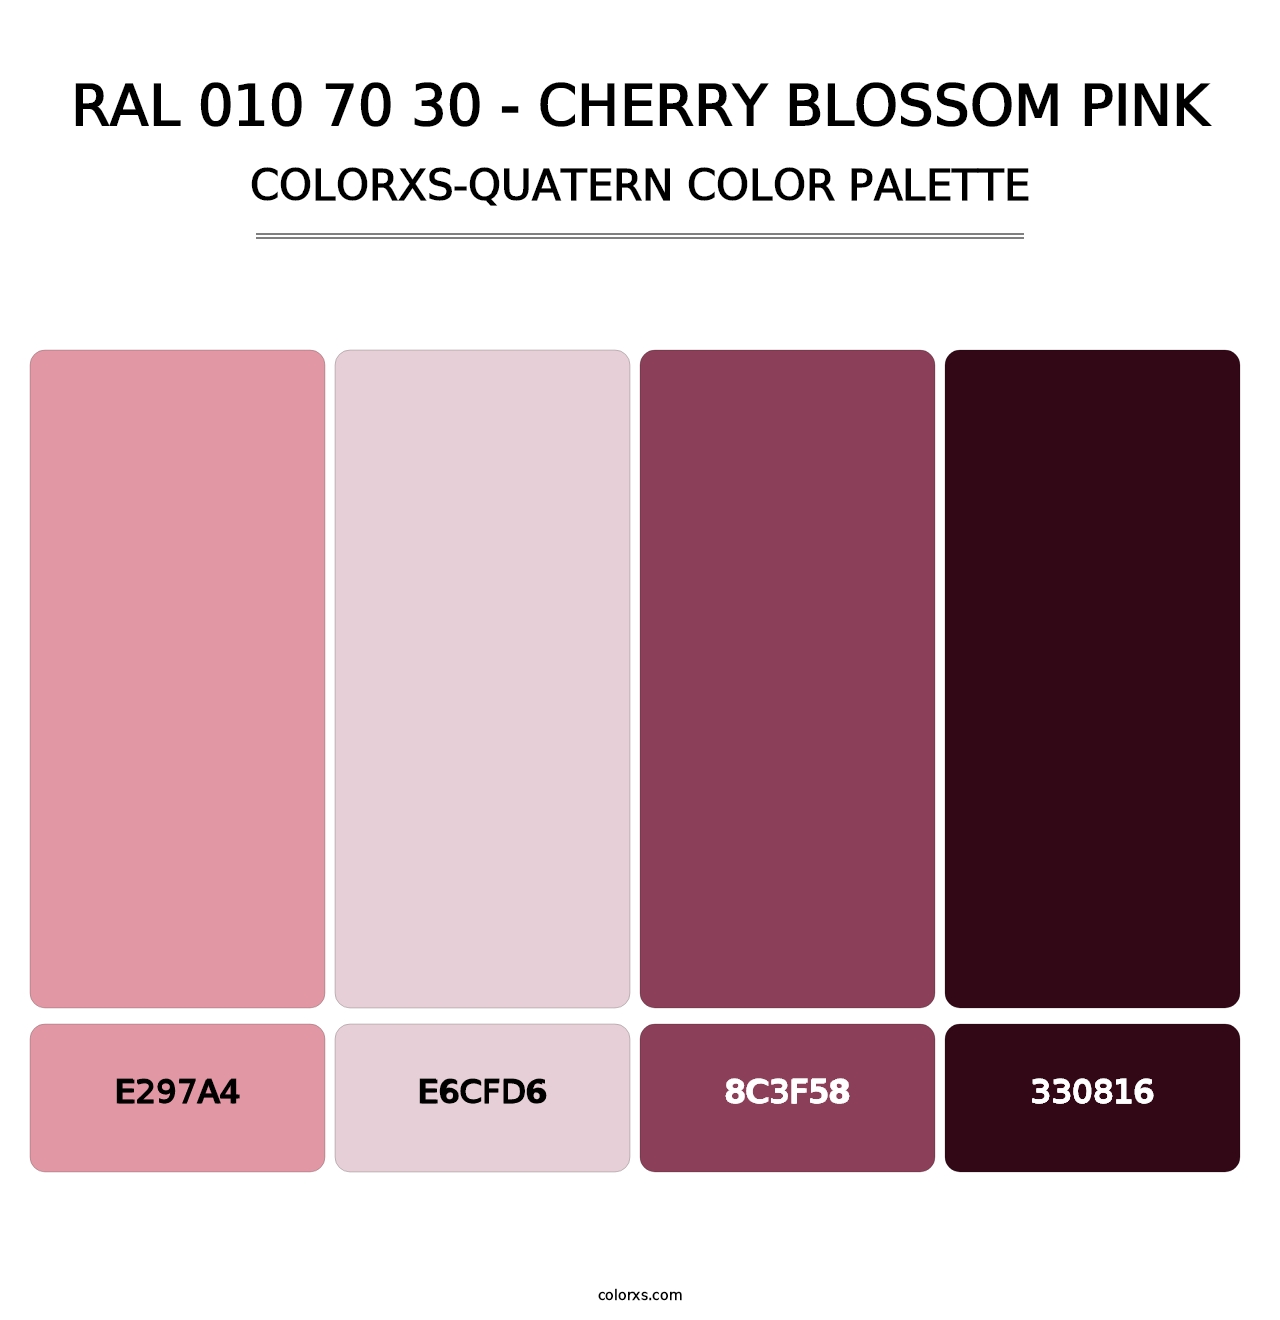 RAL 010 70 30 - Cherry Blossom Pink - Colorxs Quatern Palette